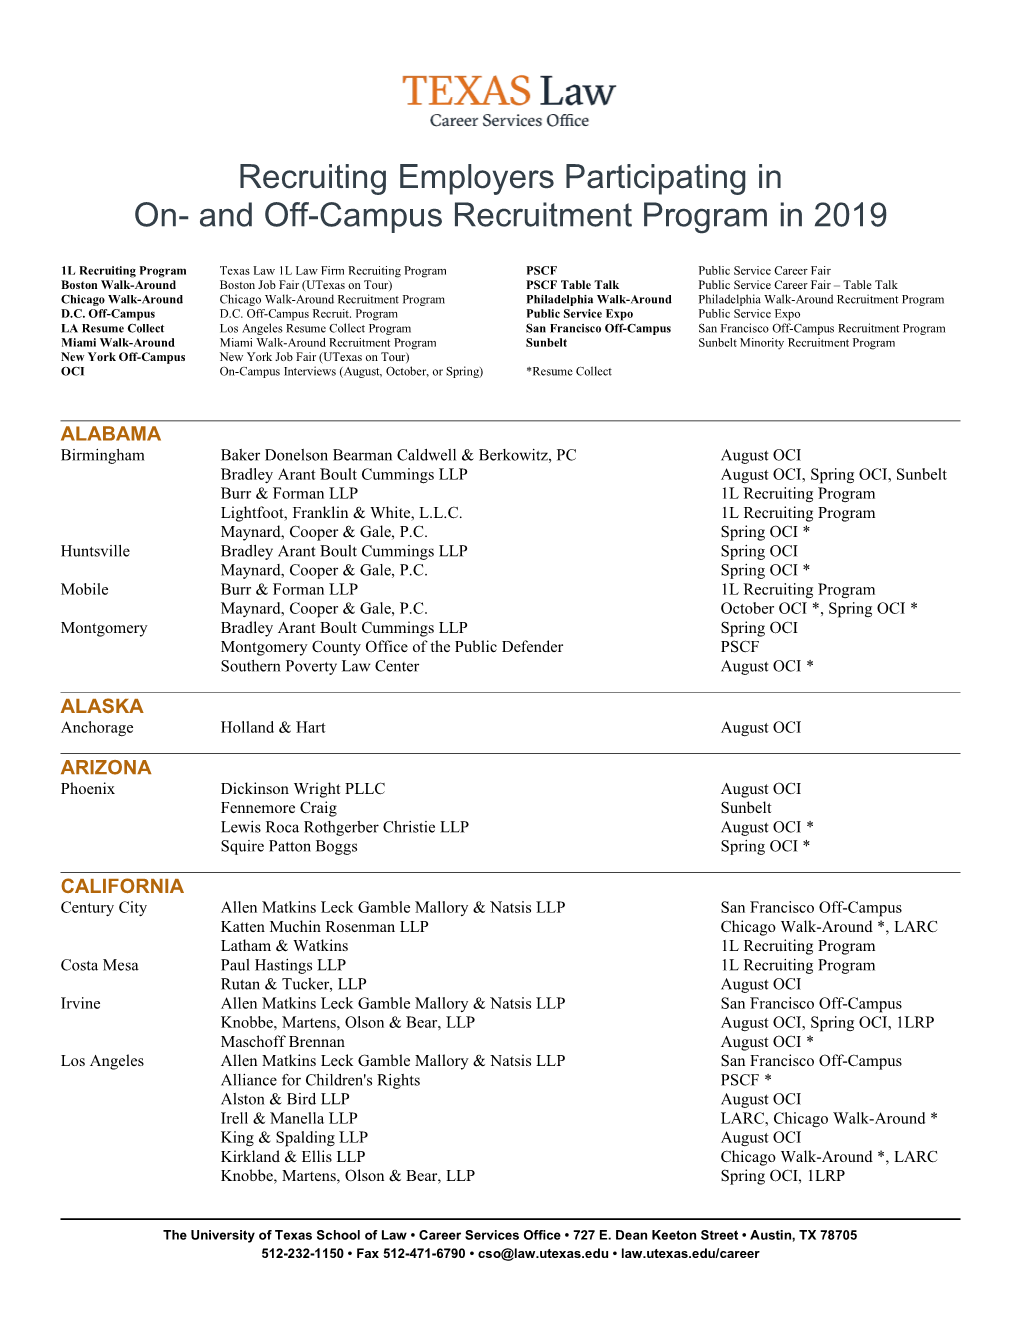 Recruiting Employers Participating in On- and Off-Campus Recruitment Program in 2019